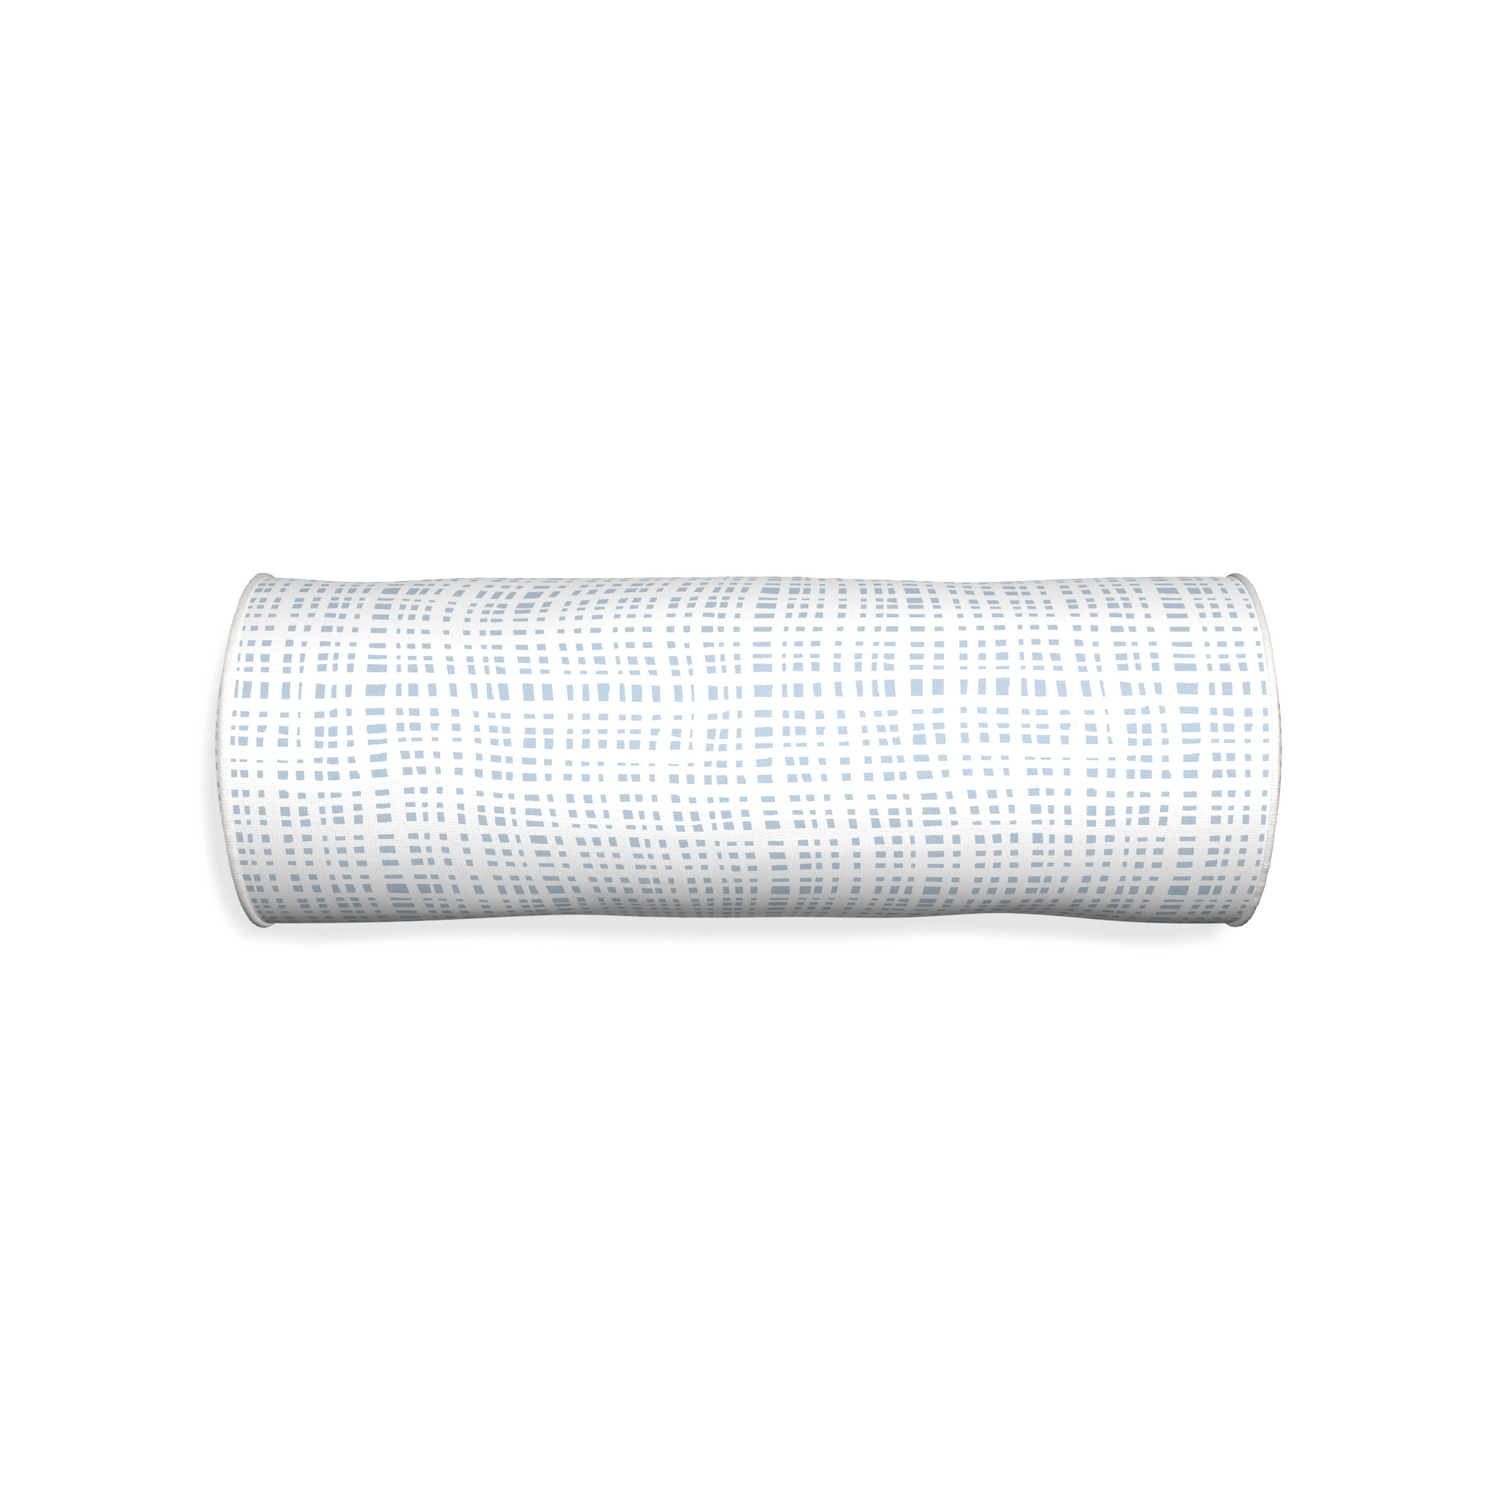 Bolster ginger custom plaid sky bluepillow with snow piping on white background